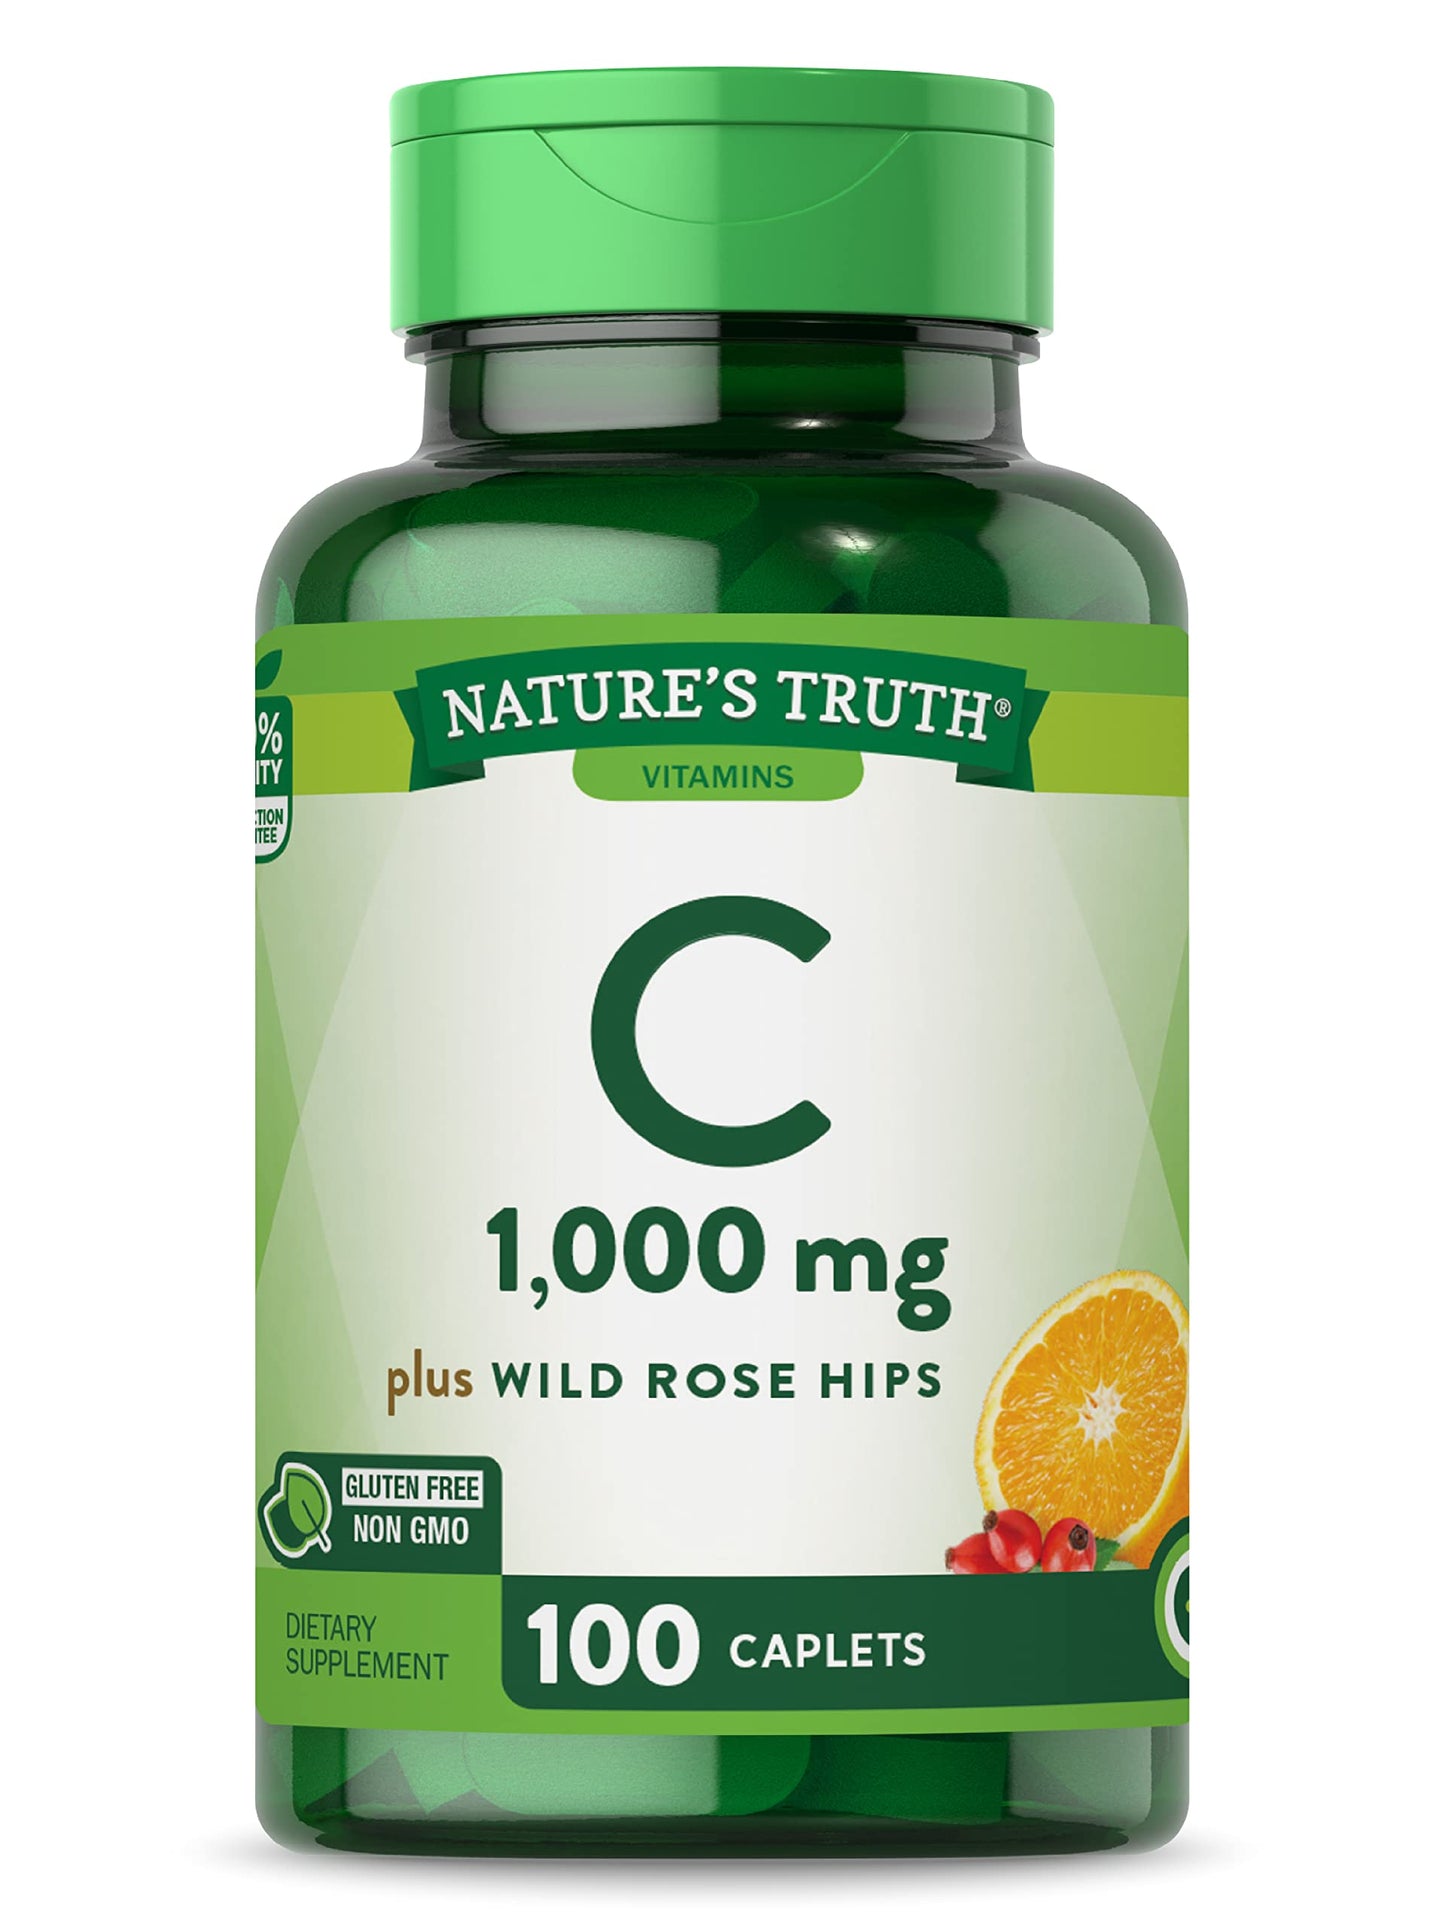 Nature's Truth's Vitamin C with Rose Hips 1000 mg